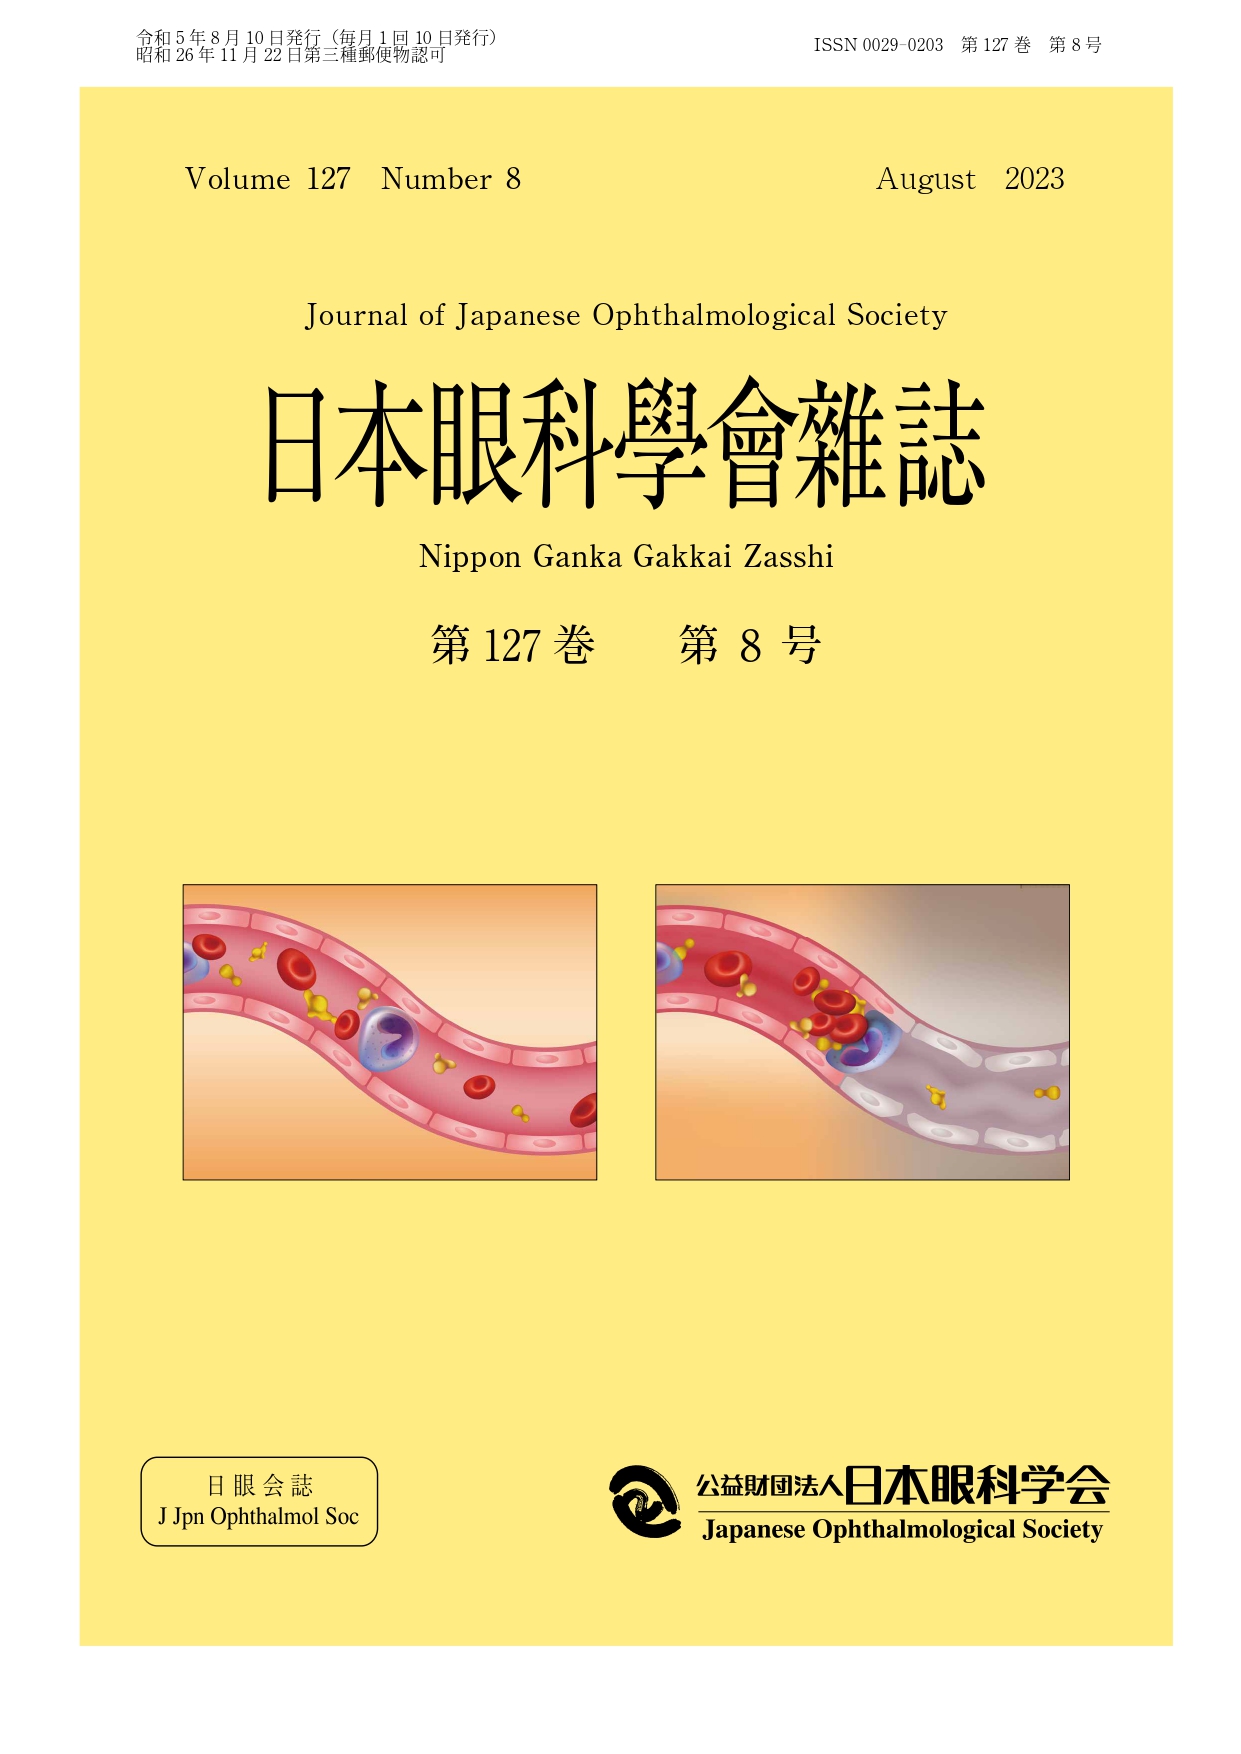 Official Publications - Japanese Ophthalmological Society